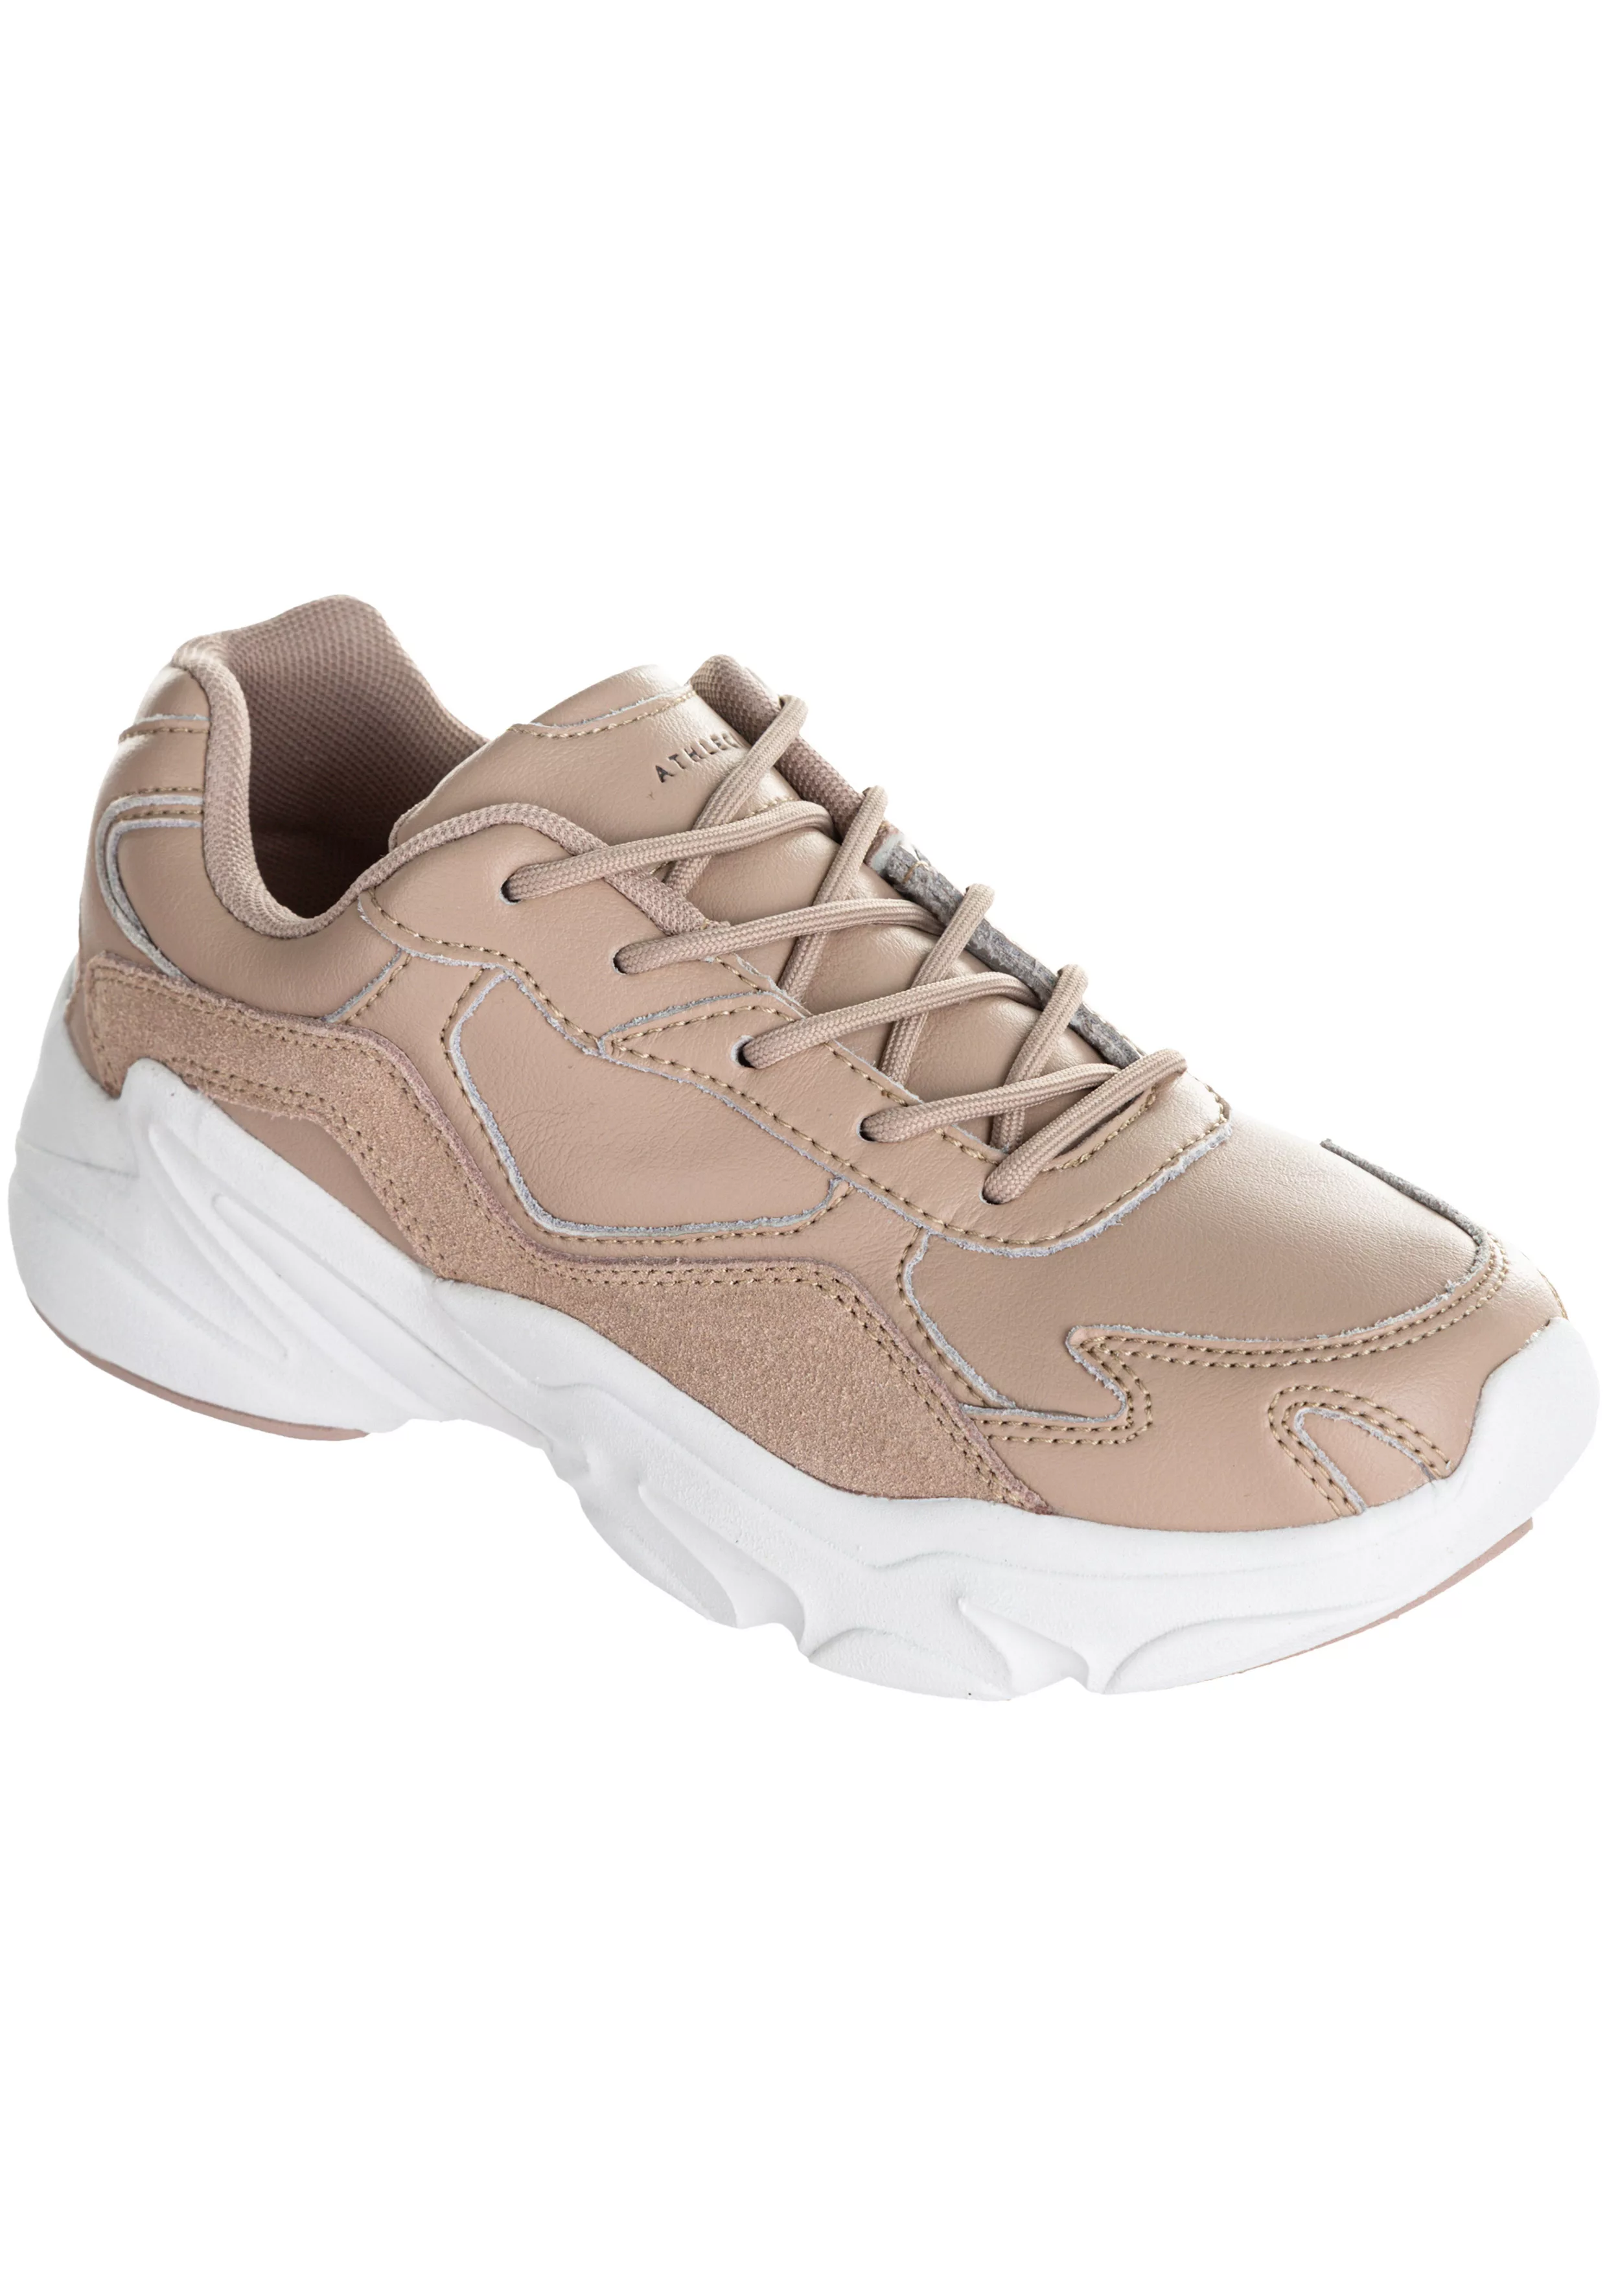 ATHLECIA Sneaker "CHUNKY Leather Trainers" günstig online kaufen